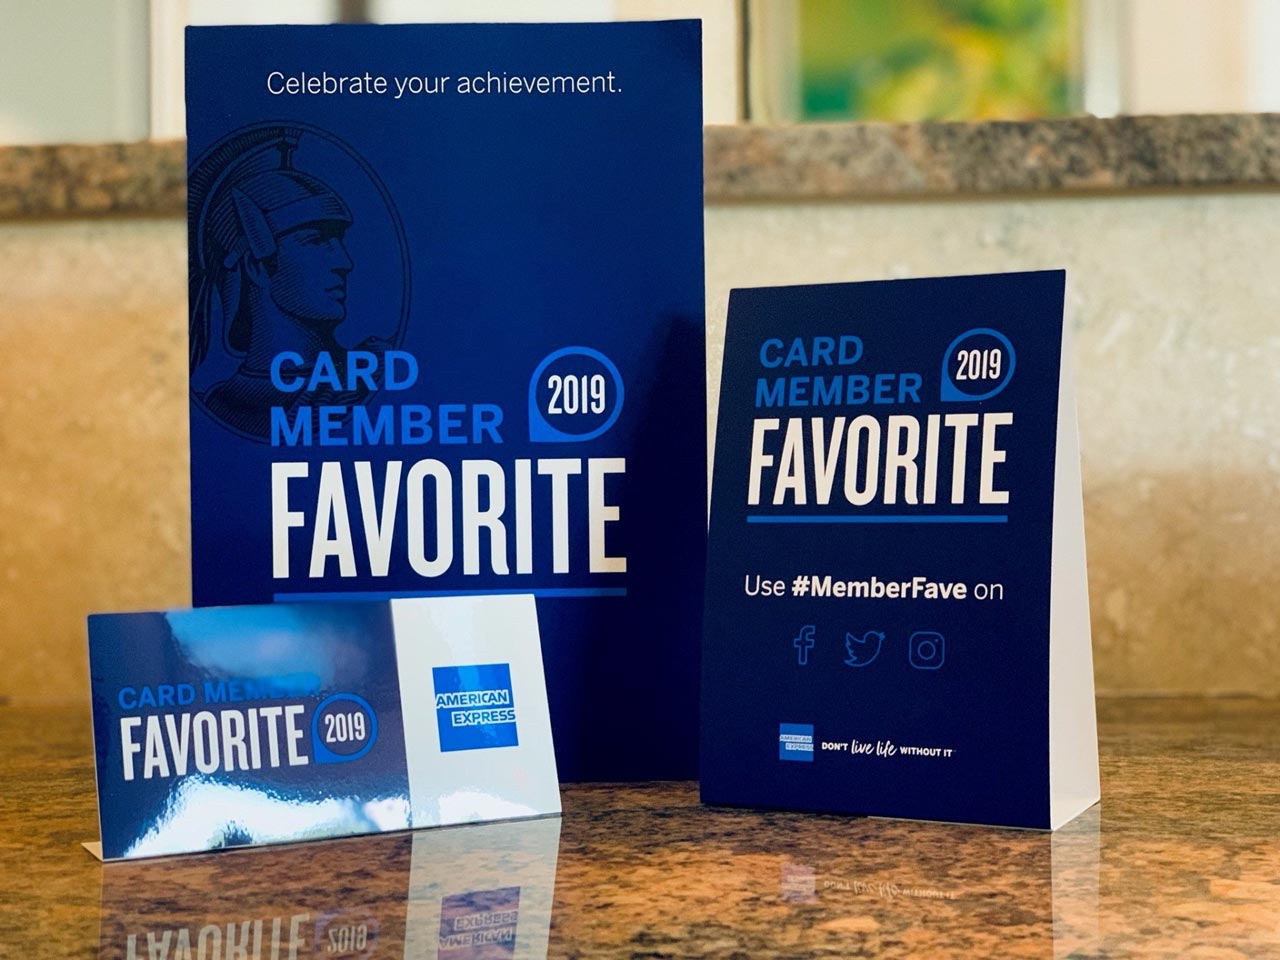 High-End Service was voted a 2019 American Express Card Member Favorite